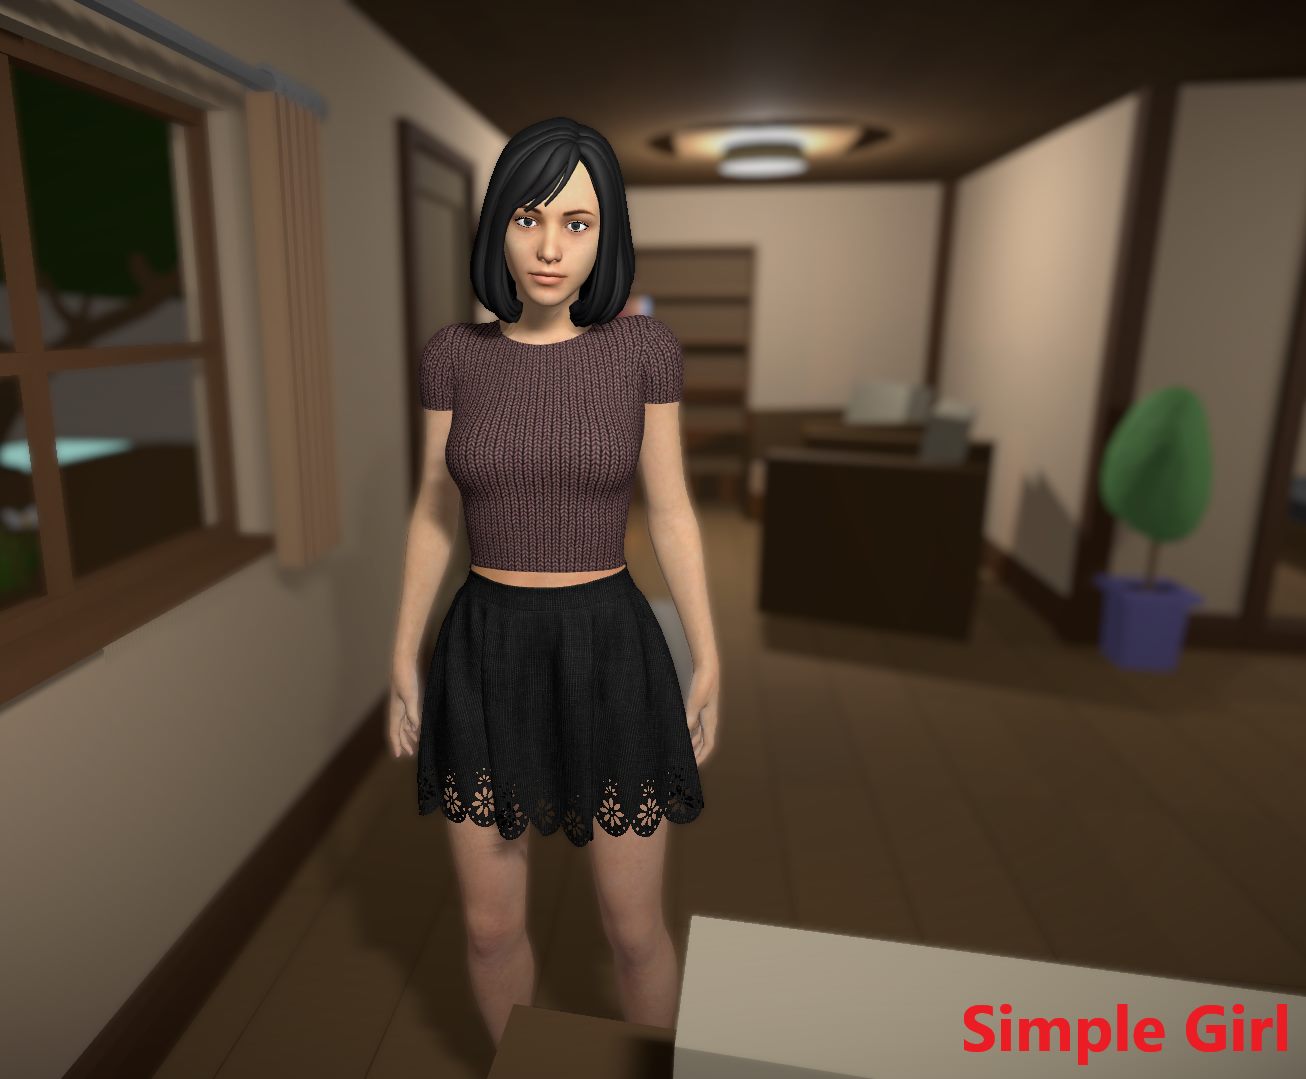 Simple Girl [Ongoing] - Version: 1.39